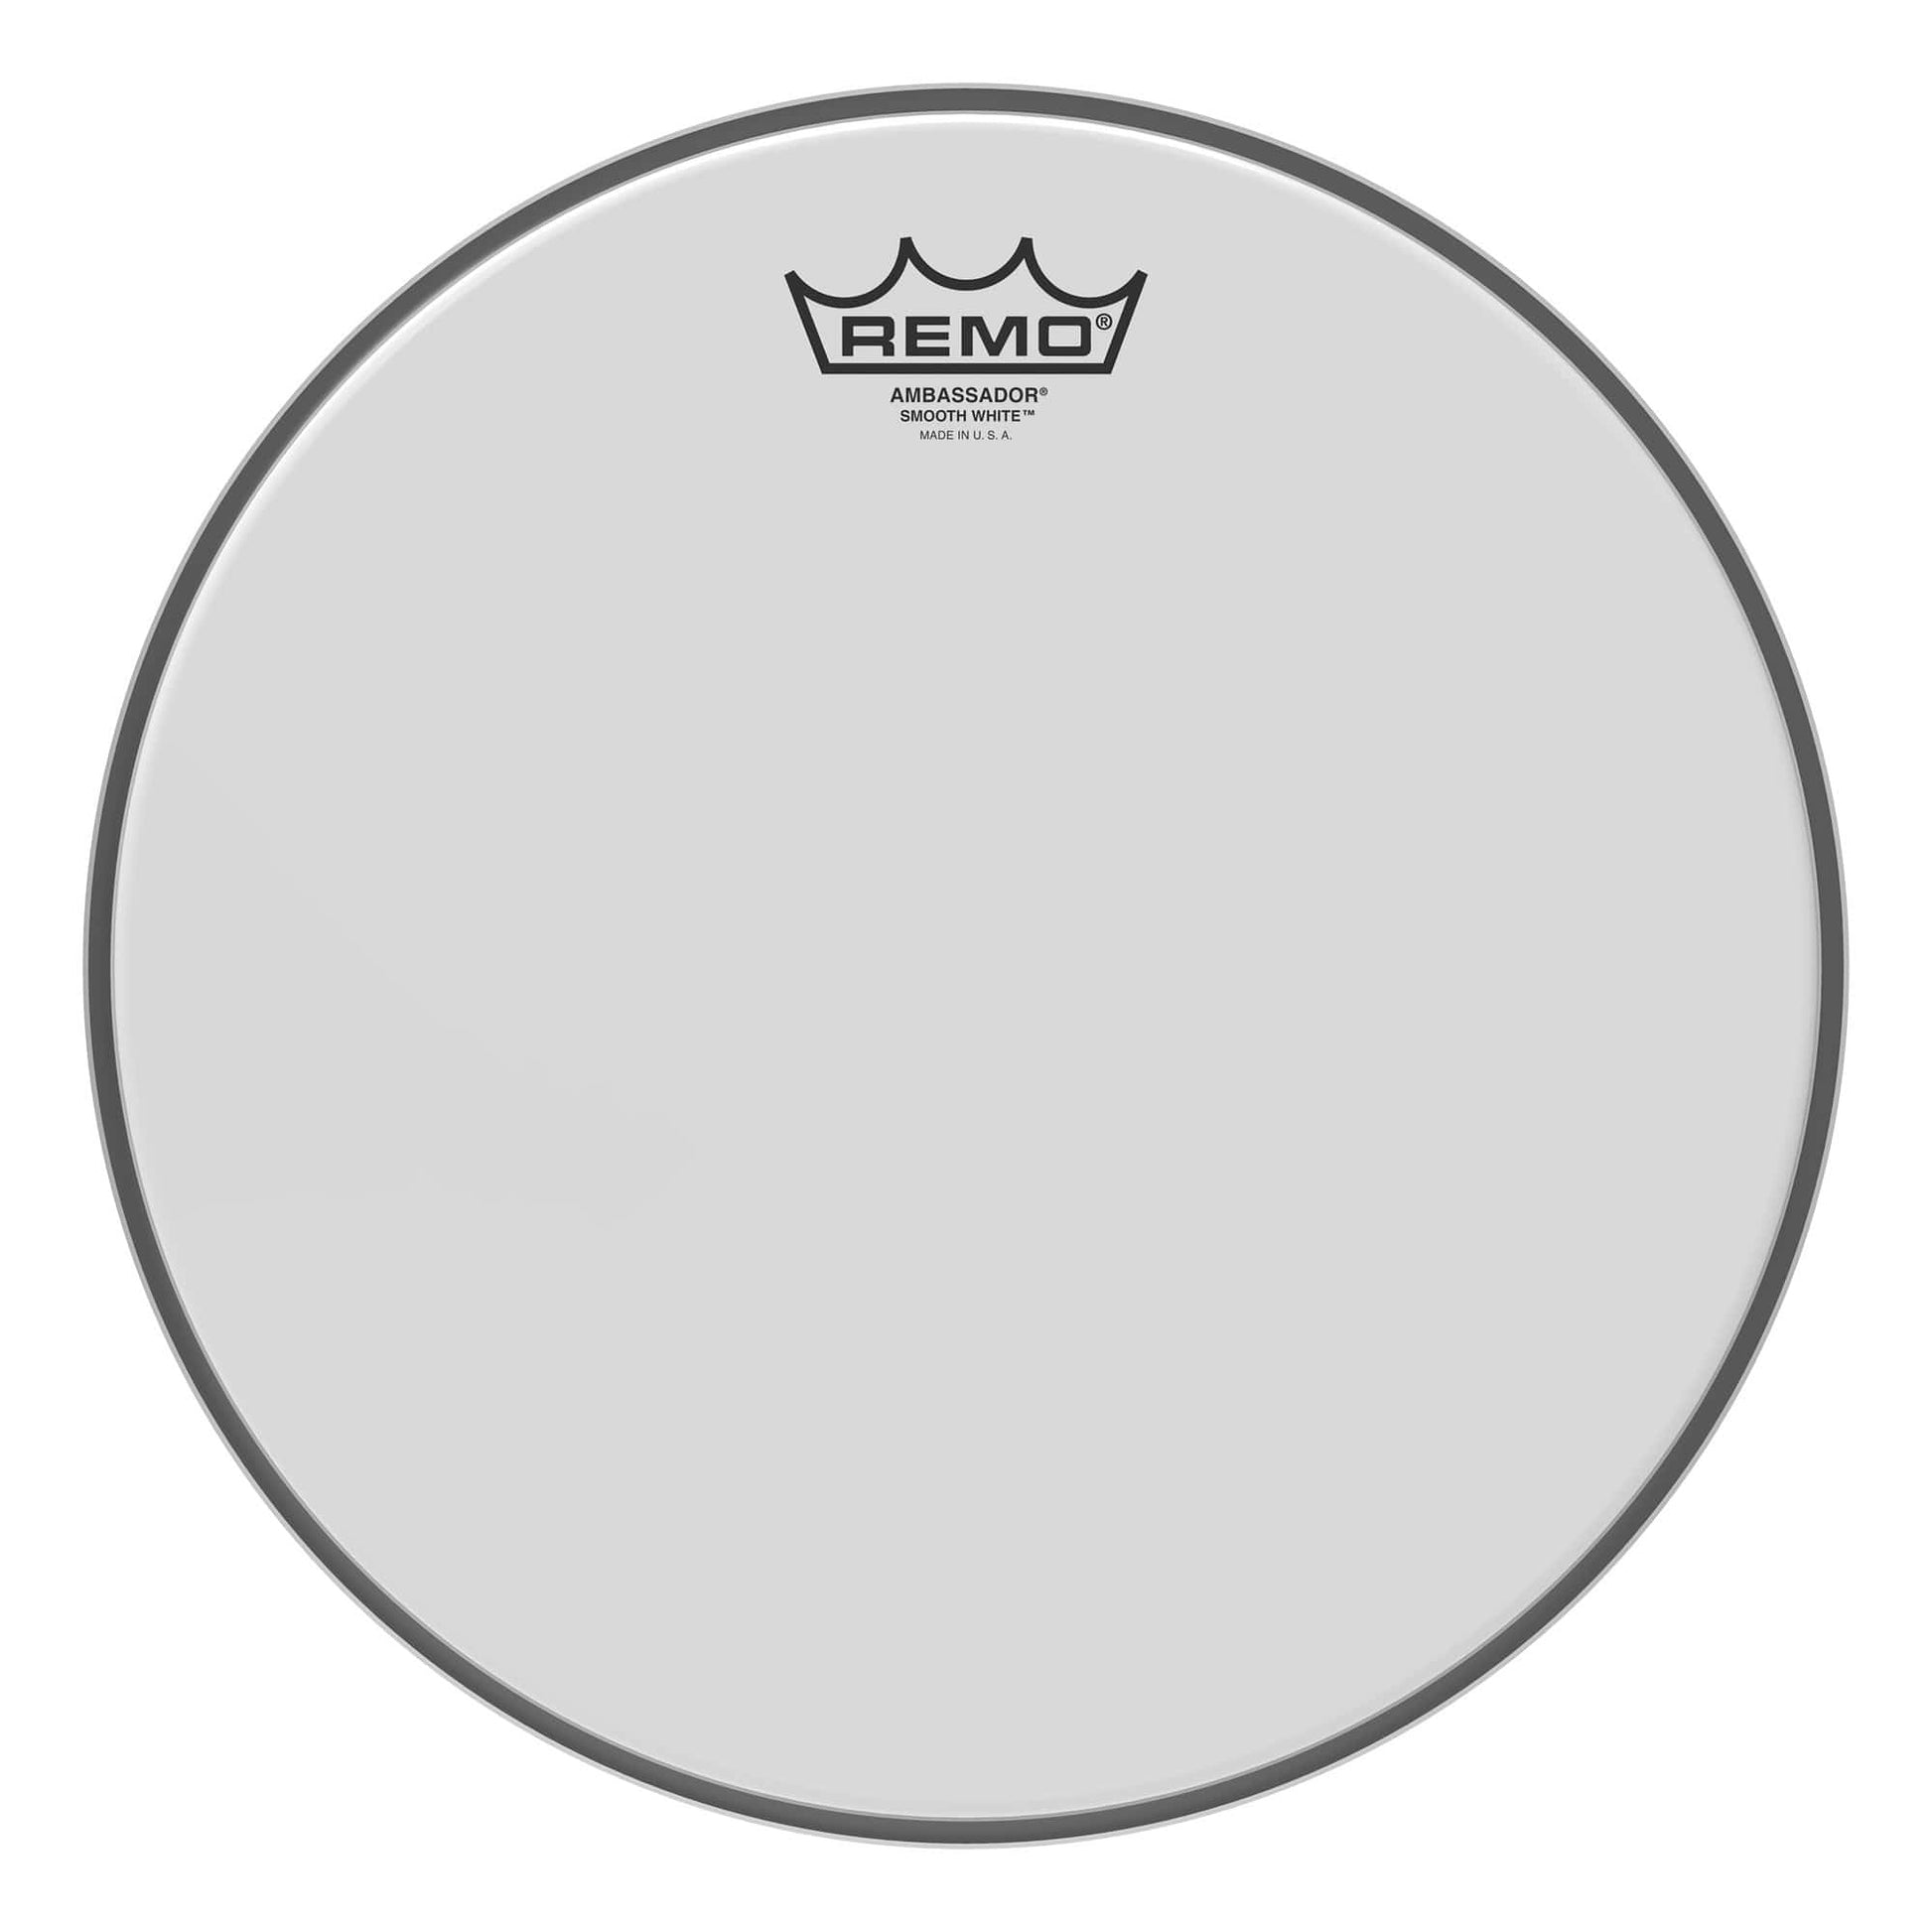 Remo 12" Ambassador Smooth White Drumhead Drums and Percussion / Parts and Accessories / Heads